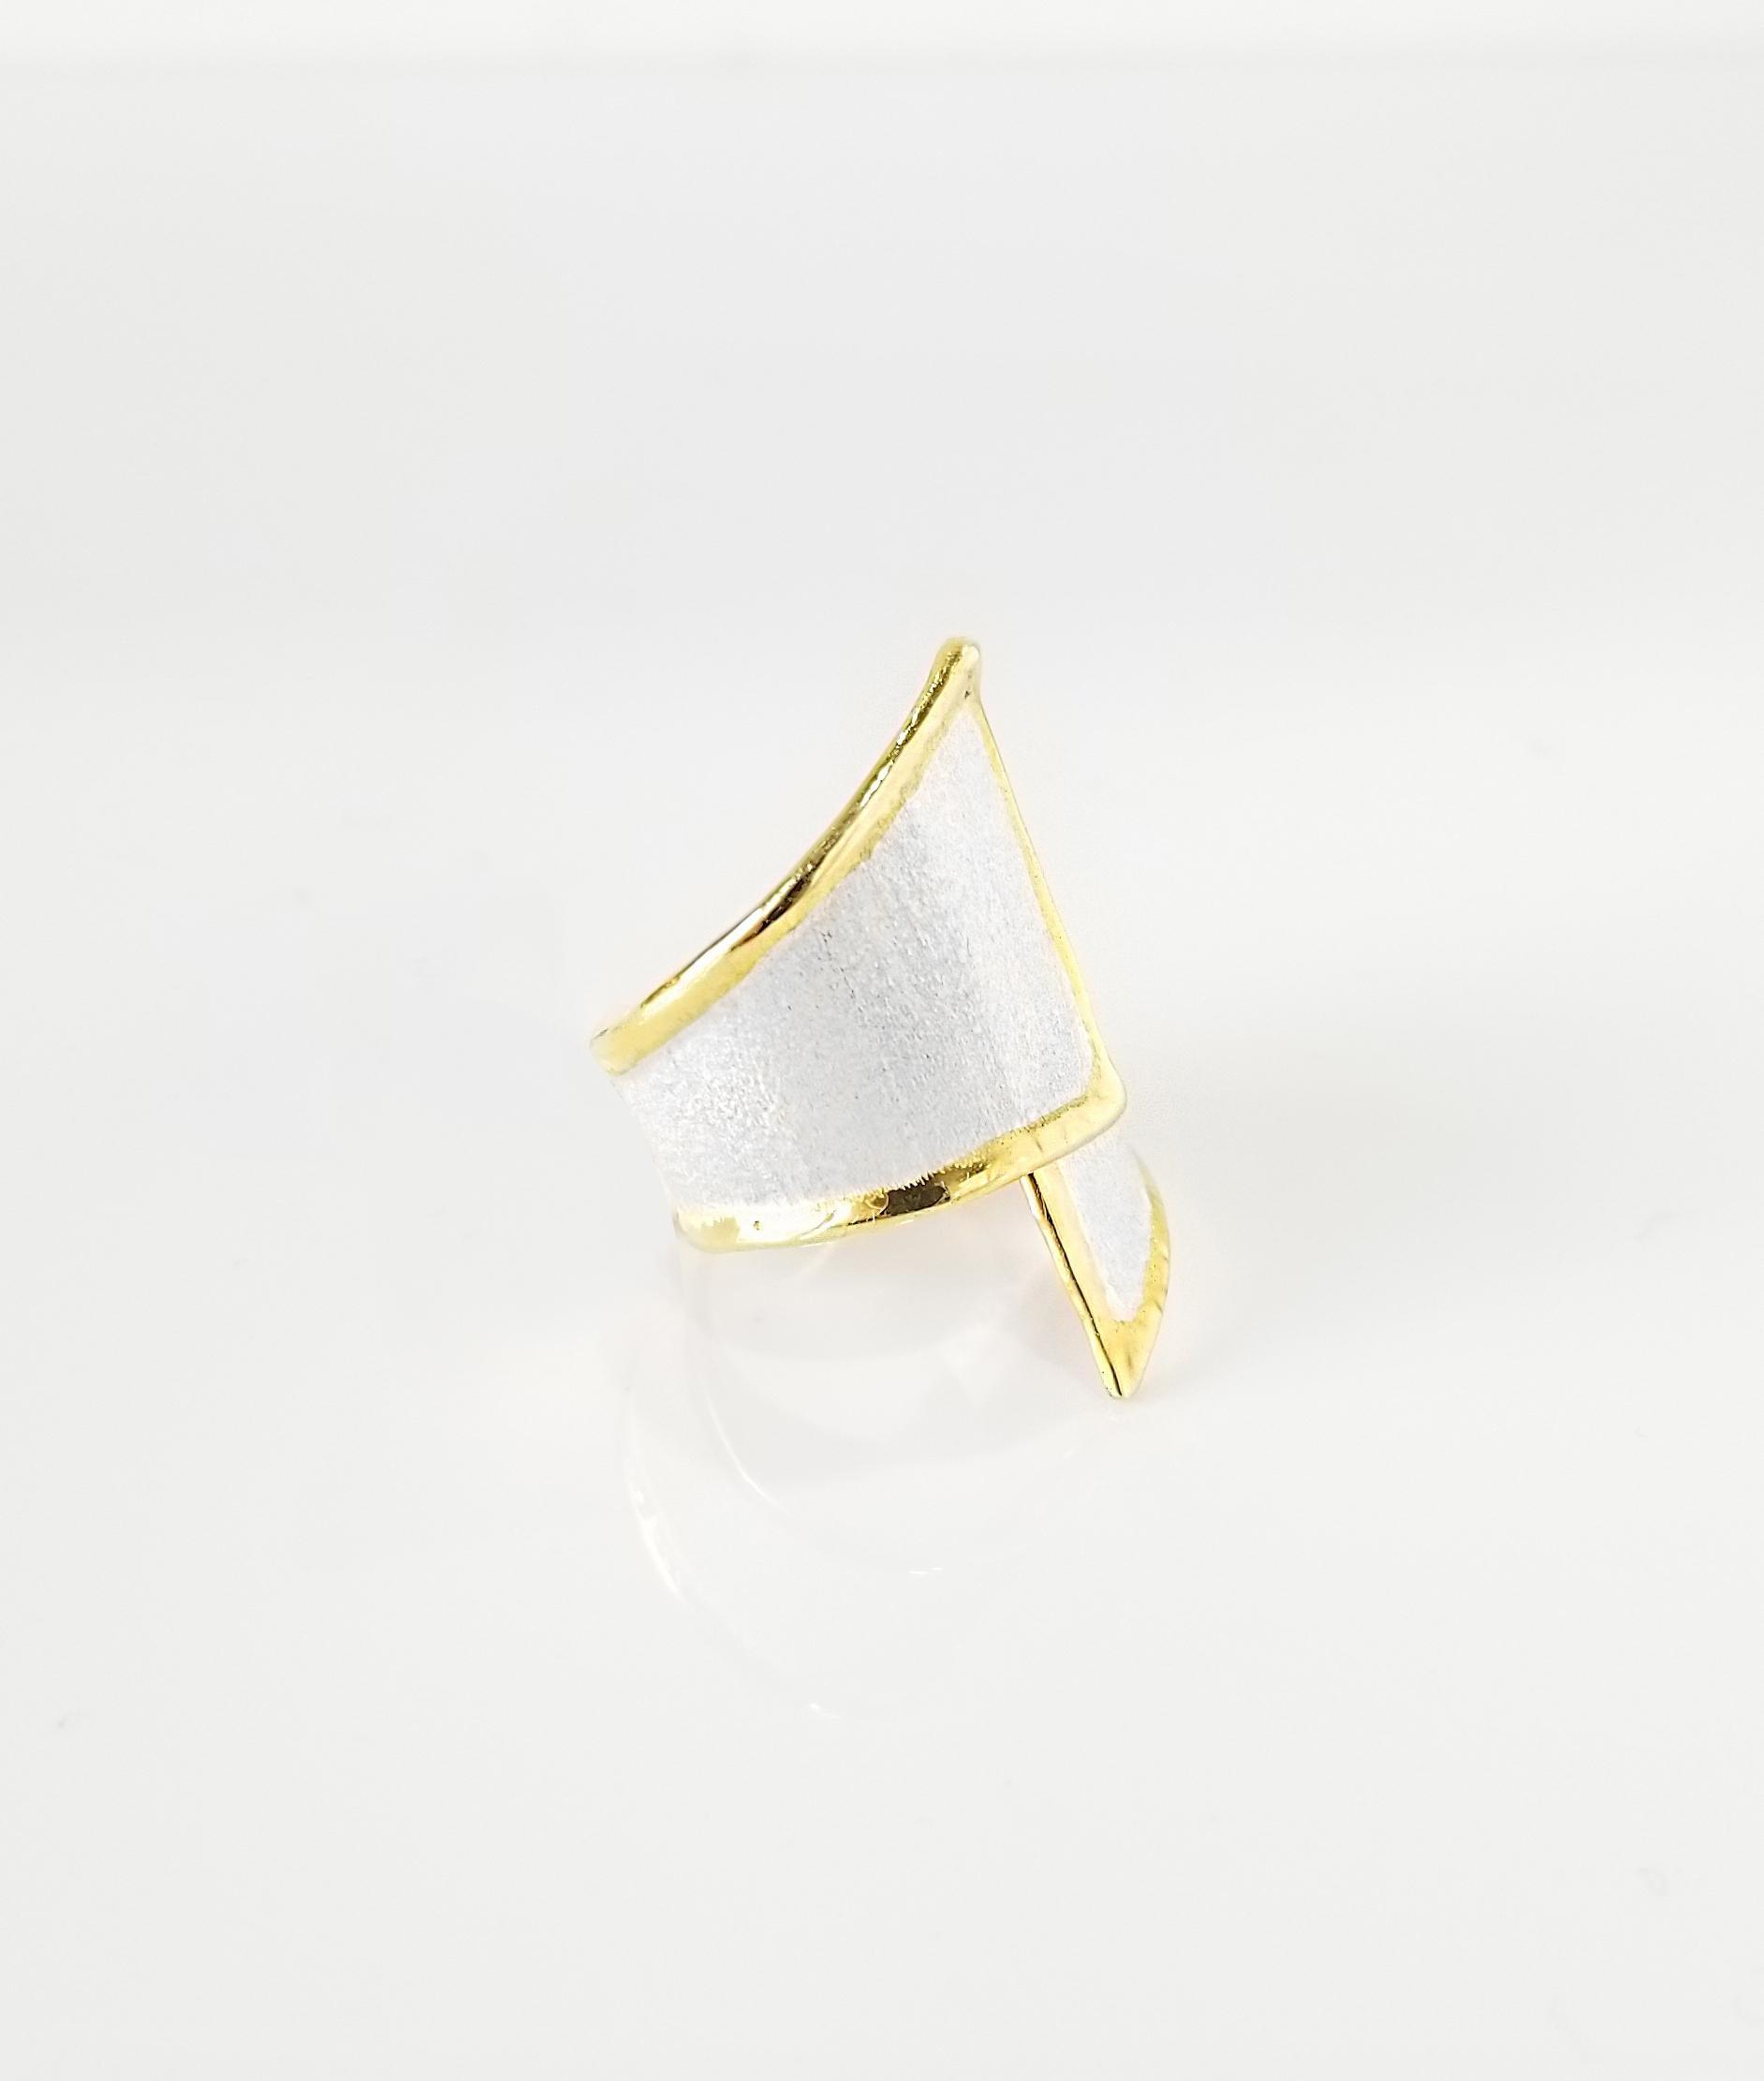 Contemporary Yianni Creations Fine Silver and 24 Karat Gold Asymmetrical Artisan Ring